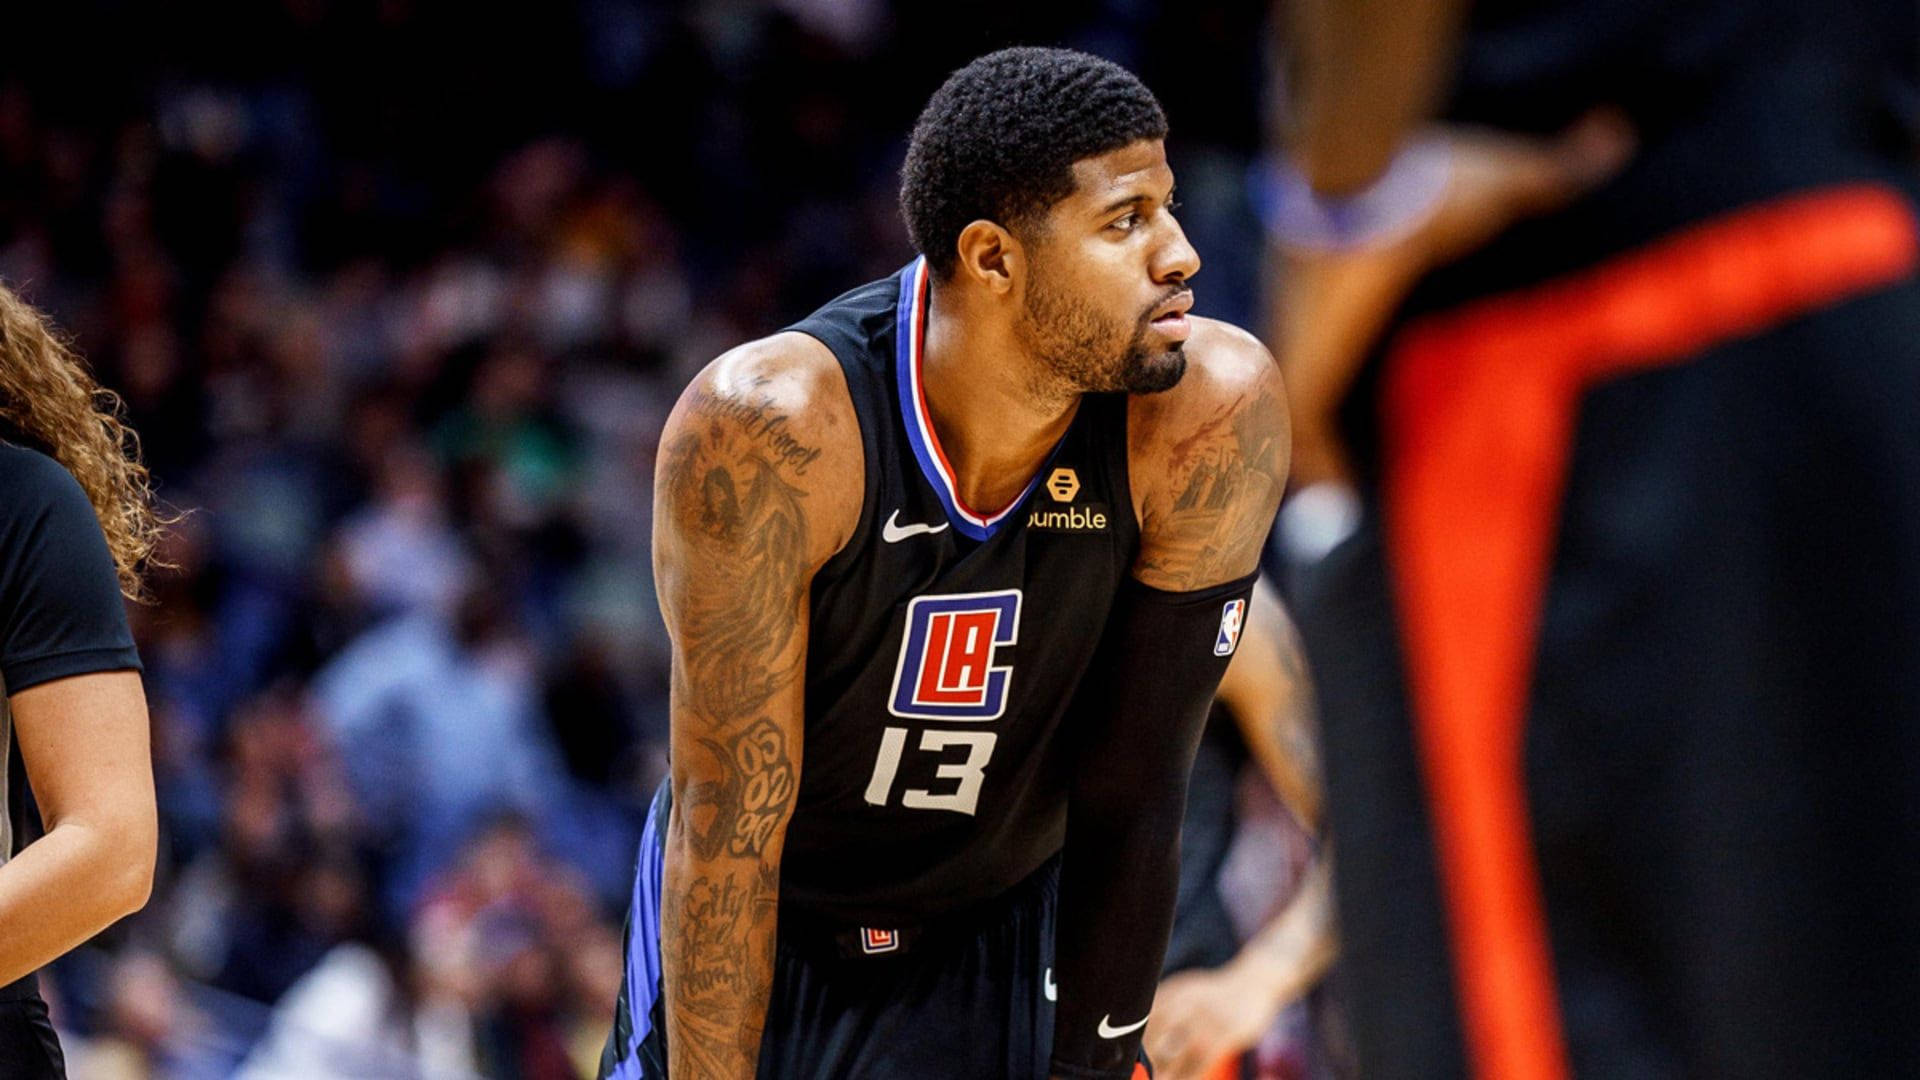 Paul George Black Clippers Jersey Background